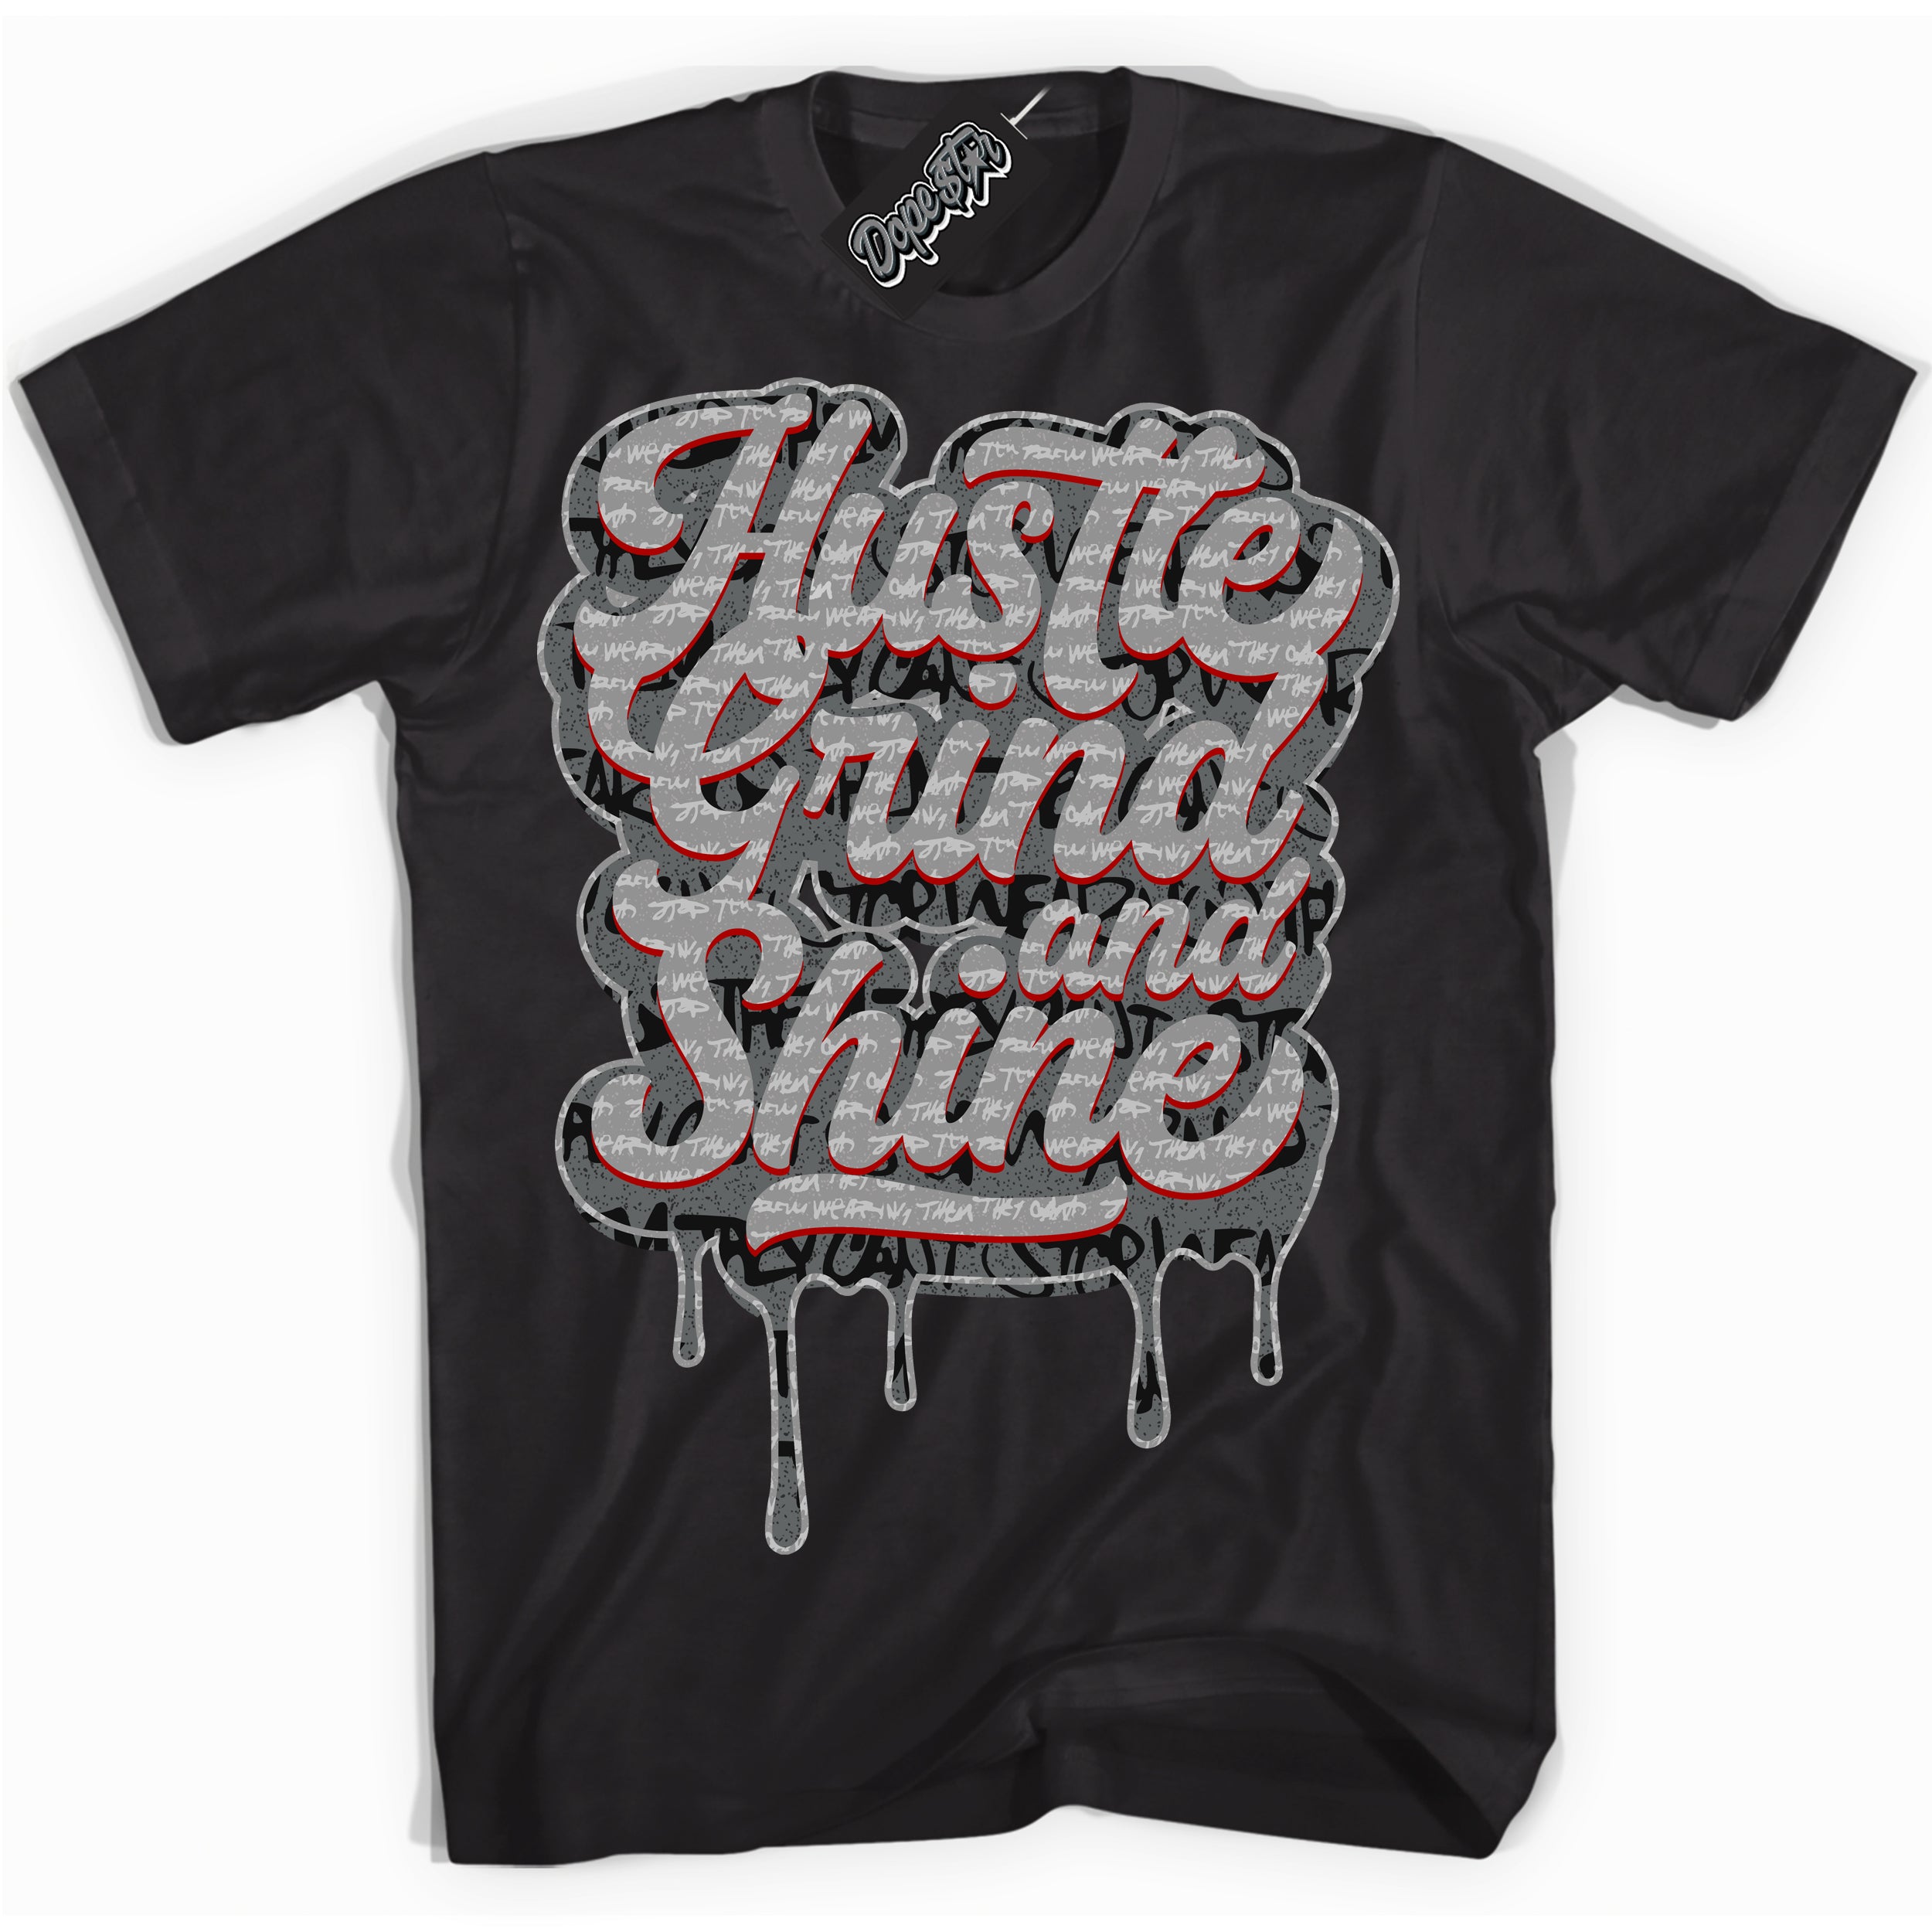 Cool Black Shirt with “ Hustle Grind And Shine ” design that perfectly matches Rebellionaire 1s Sneakers.